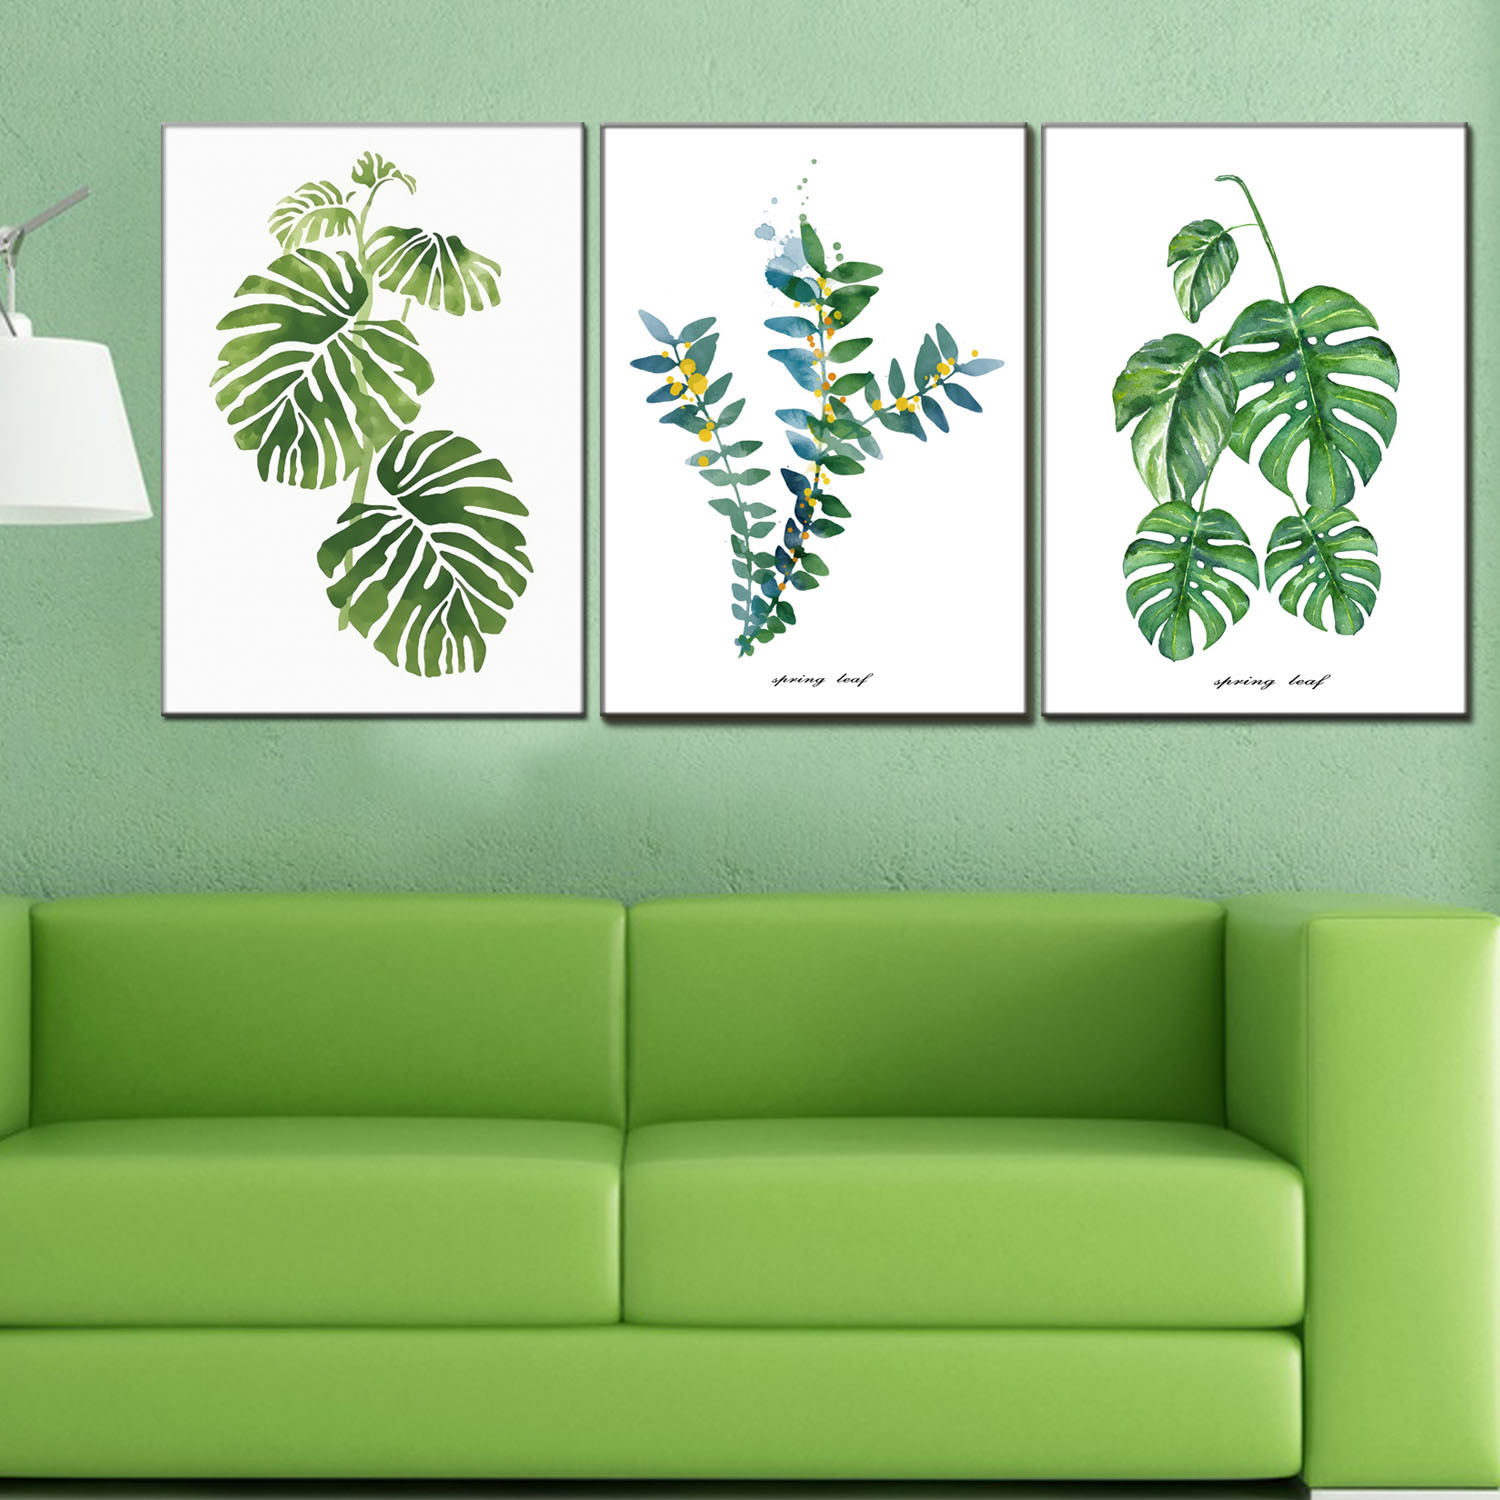 Canvas Painting Spray Painting Green Plants Set Painting